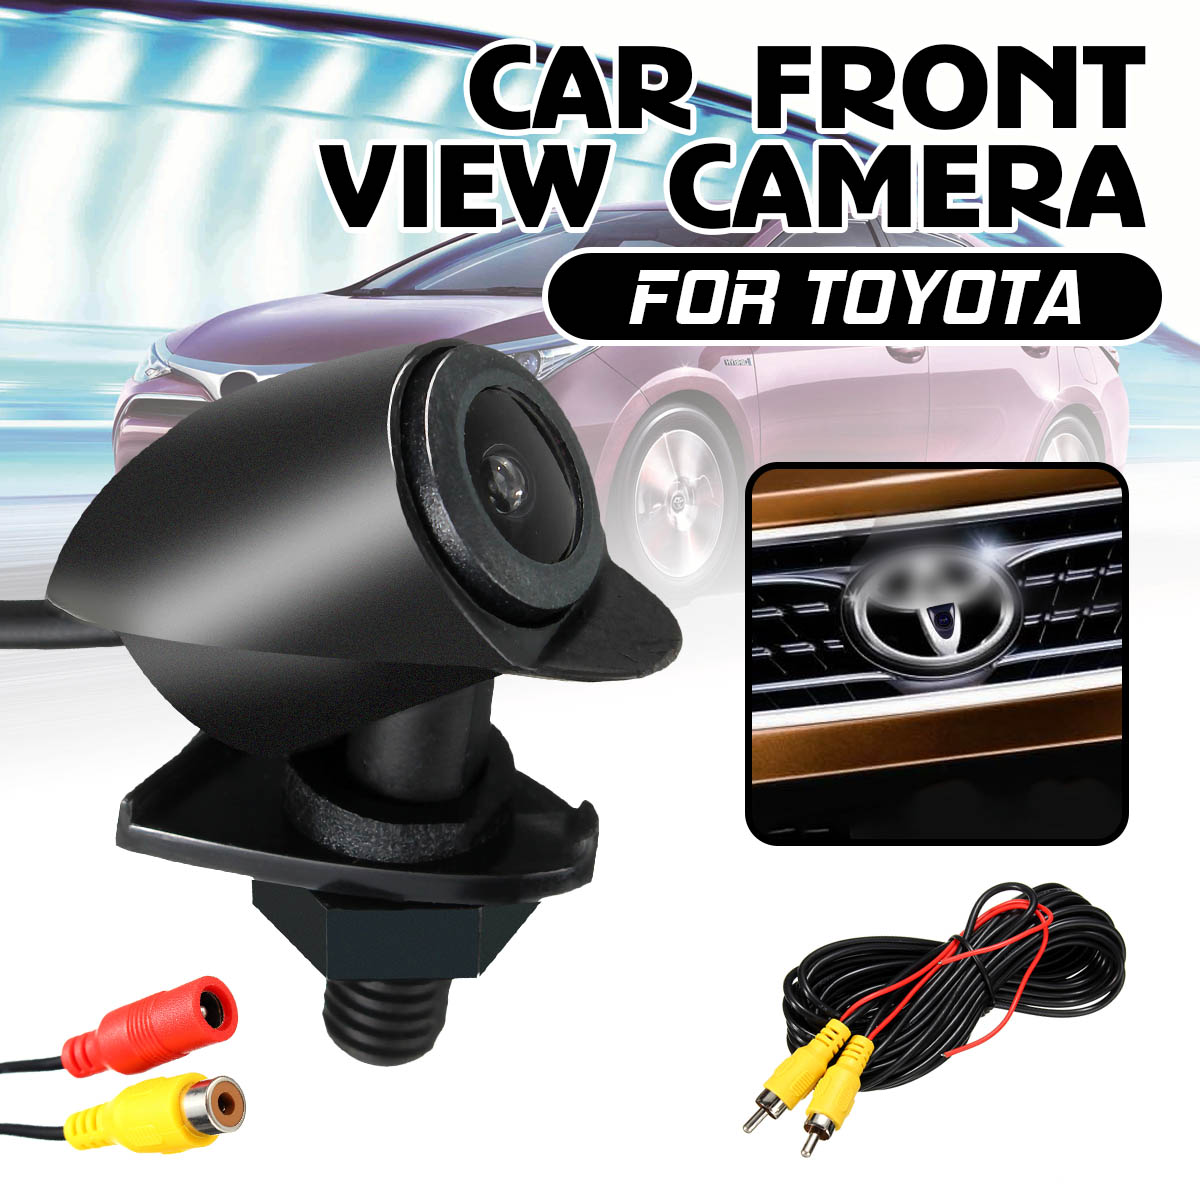 US-Car Front View Camera Night Vision 170 Wide Degrees Logo Embedded for Toyota 